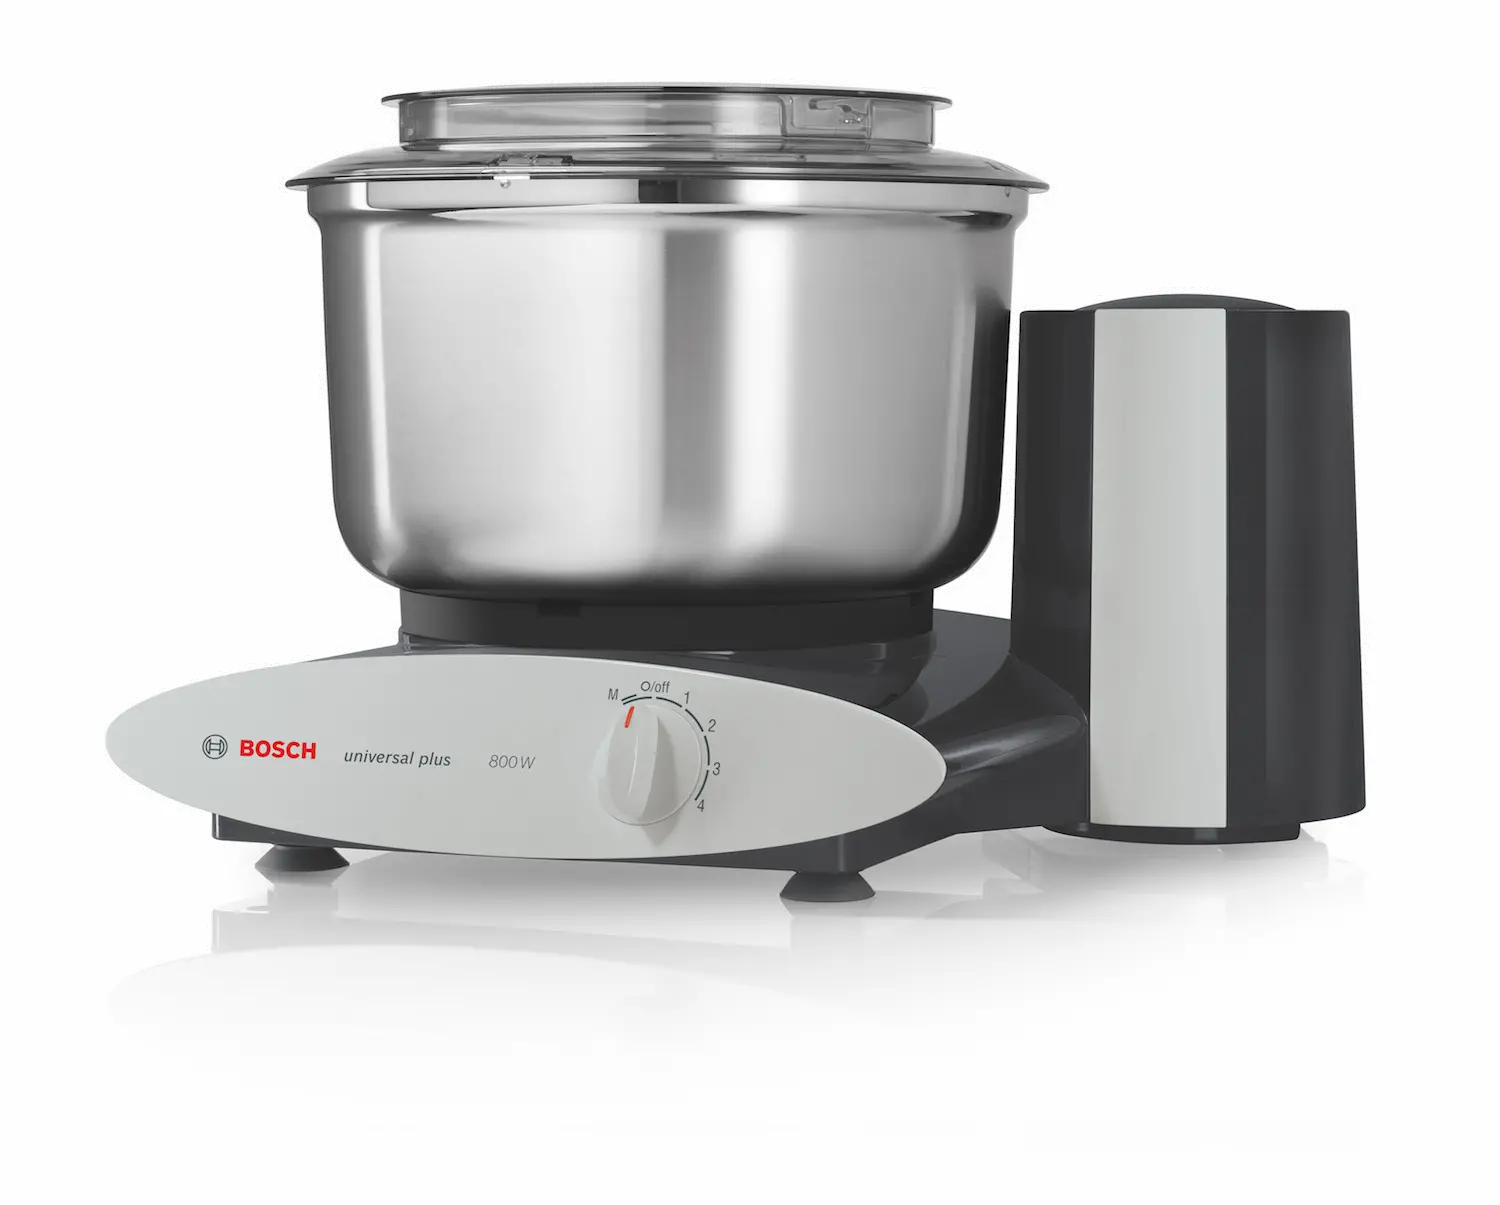 https://static.rcwilley.com/products/111759528/Bosch-Universal-Plus-Mixer-with-Dough-Hook-Extender--Black-rcwilley-image1.webp